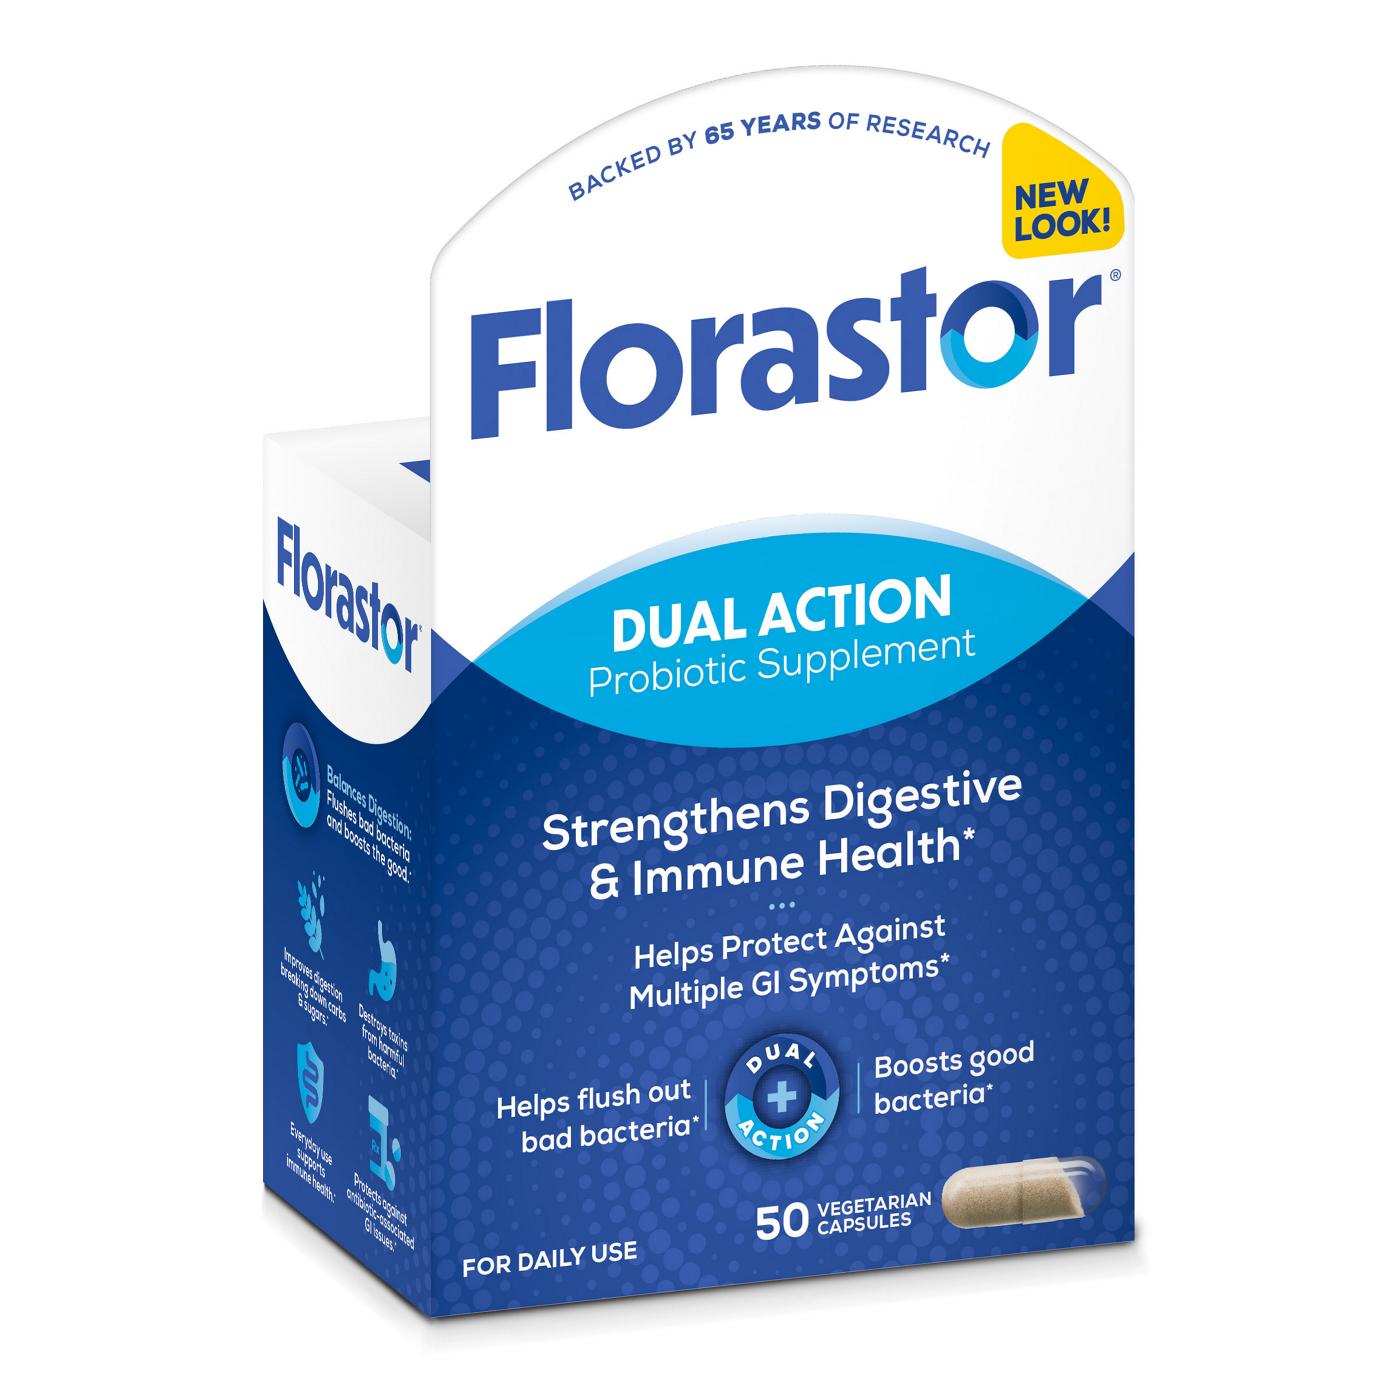 Florastor Unisex Daily Probiotic Supplement Capsules for Digestive Health; image 4 of 4